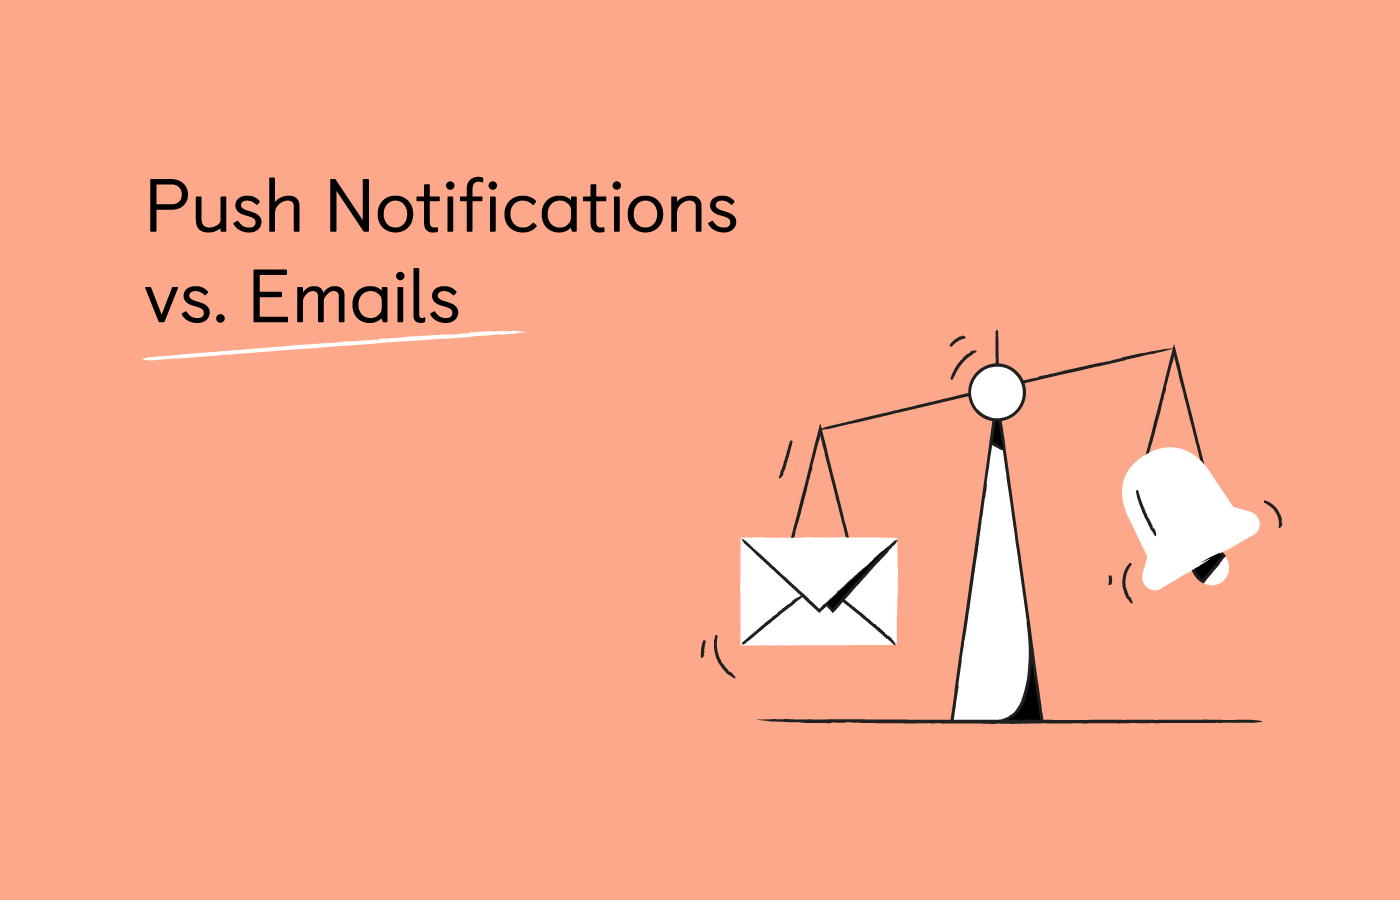 How to Increase Sales with Push Notifications and Emails?